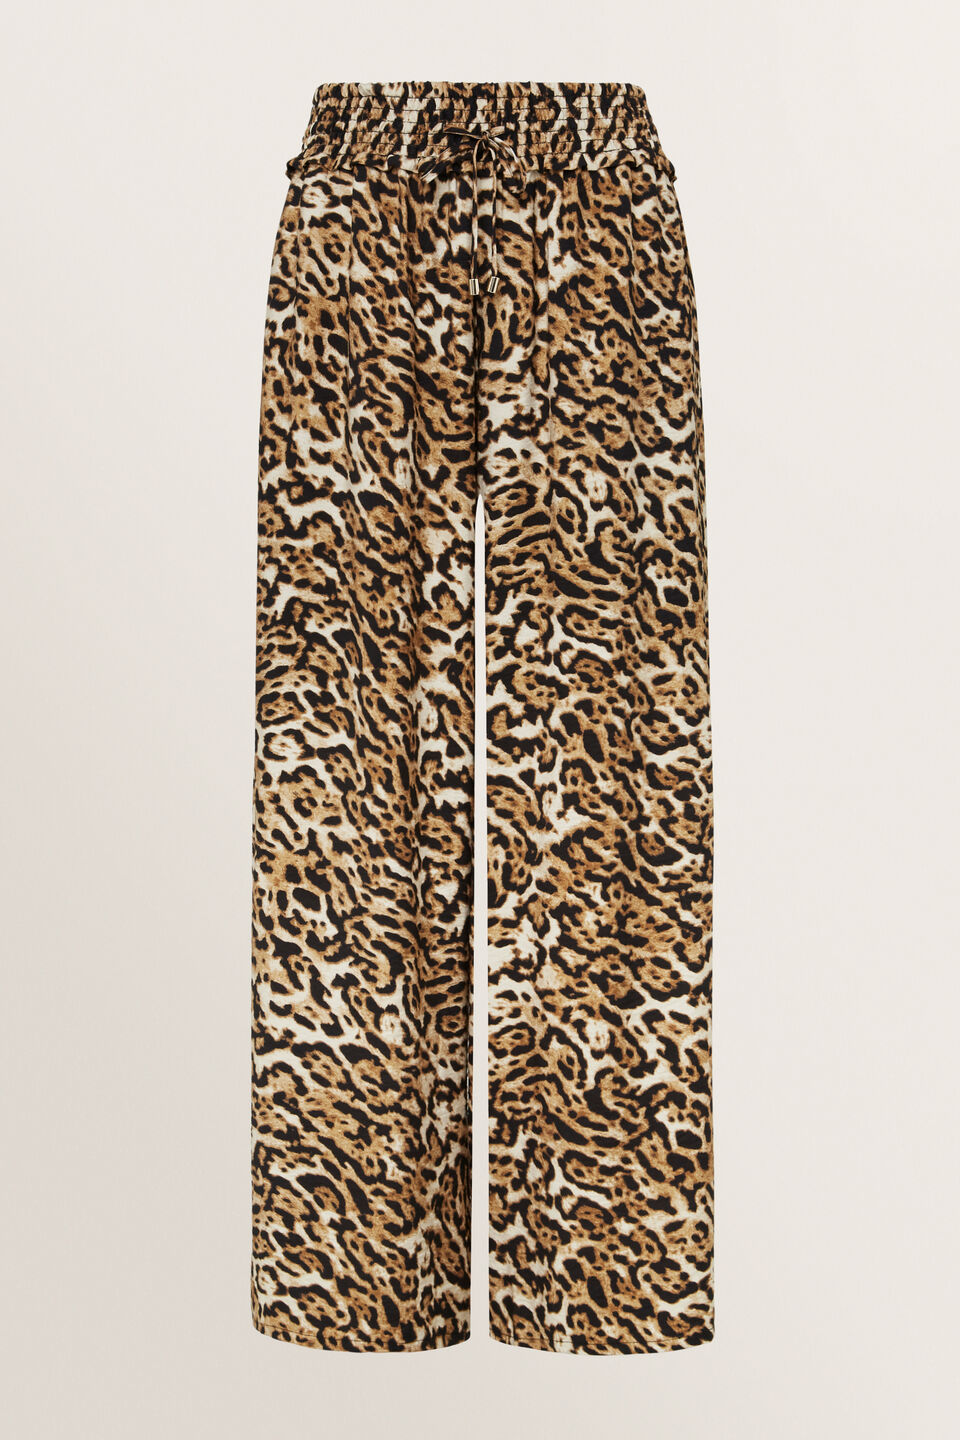 Relaxed Leopard Pant  Leopard